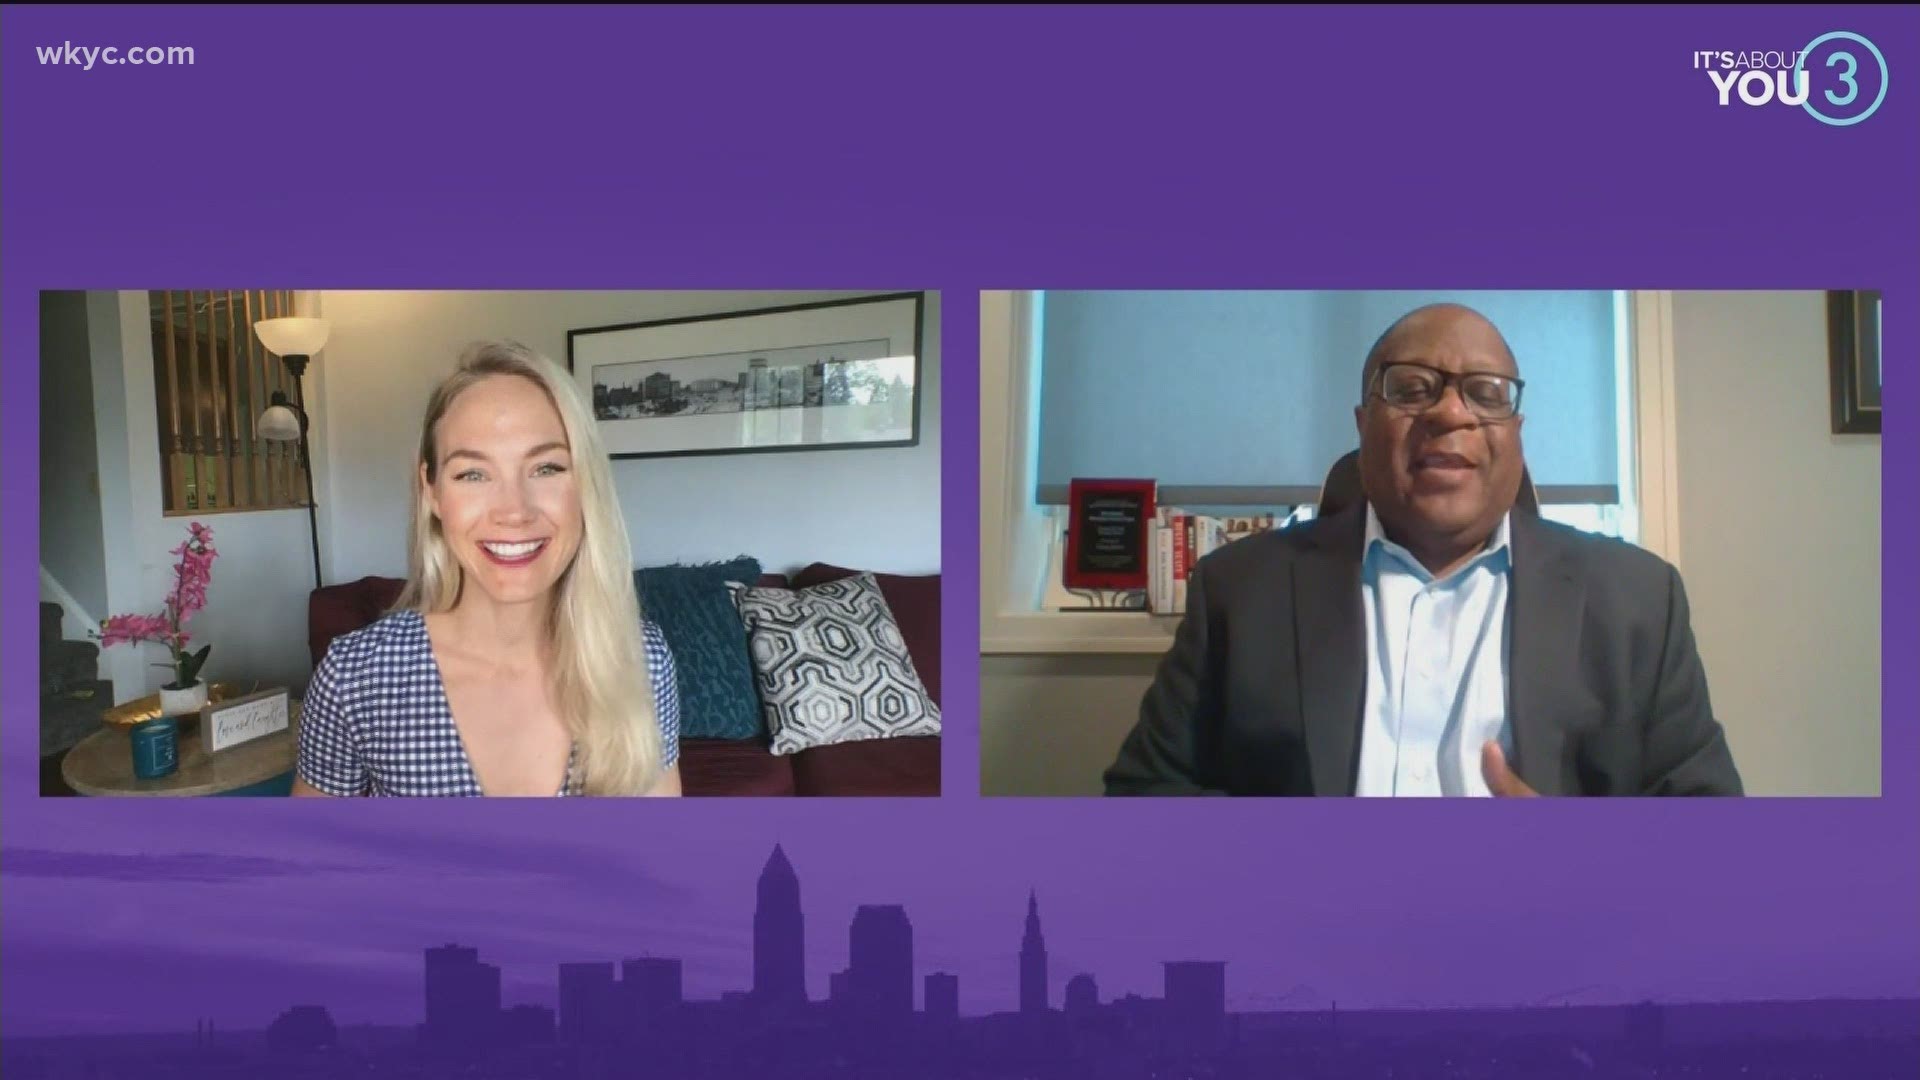 Alexa is talking with Greg Jones today, Chief Diversity, Equity and Inclusion officer at Key Bank all about celebrating PRIDE and supporting to the LGBT community.